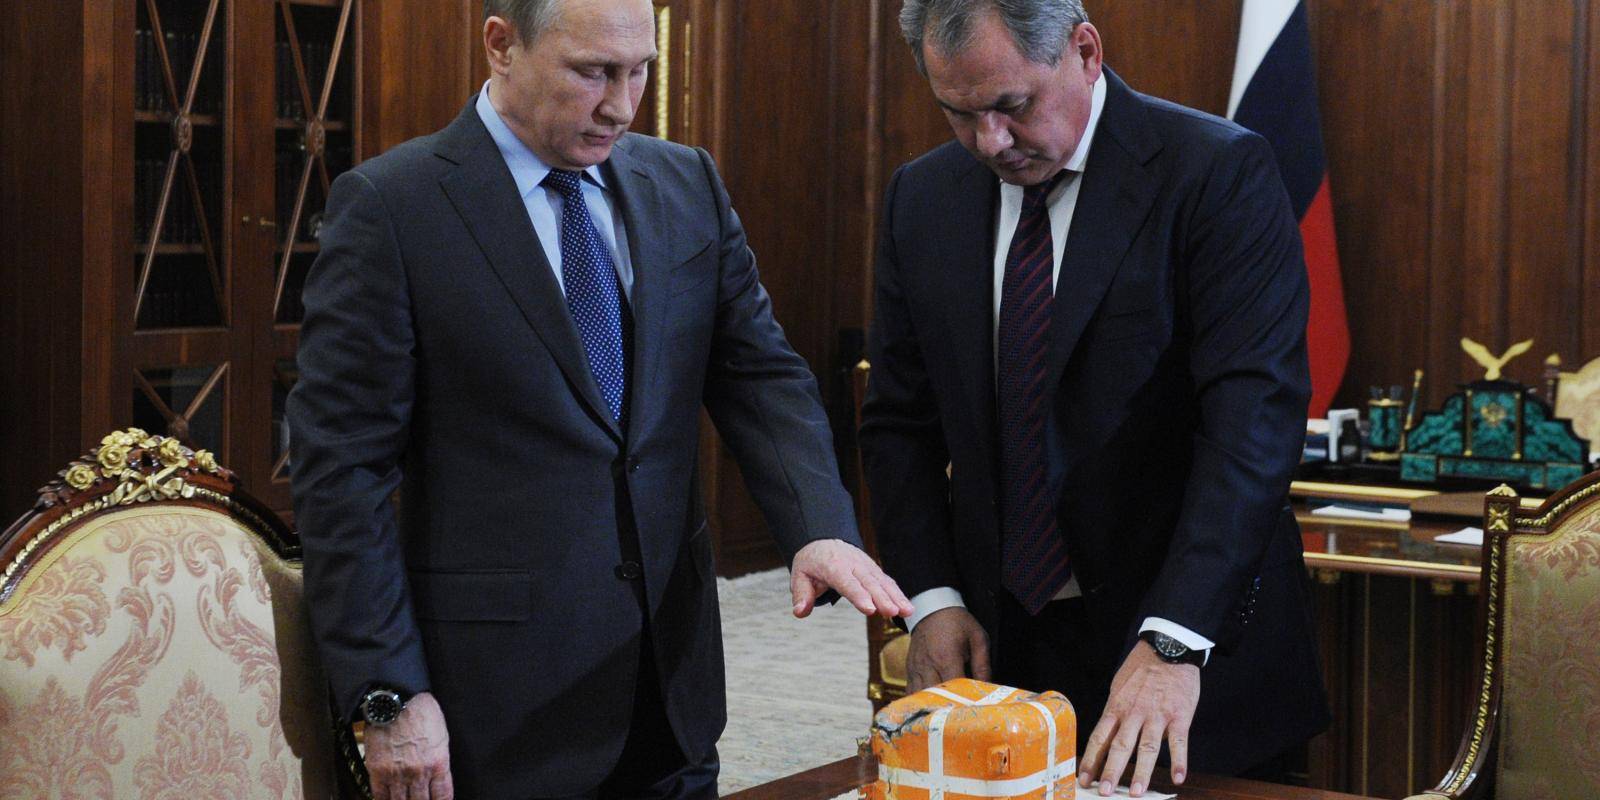 President Putin and Defence Minister Sergey Shoygu view flight data recorder from Russian jet shot down in Turkish airspace in November 2015